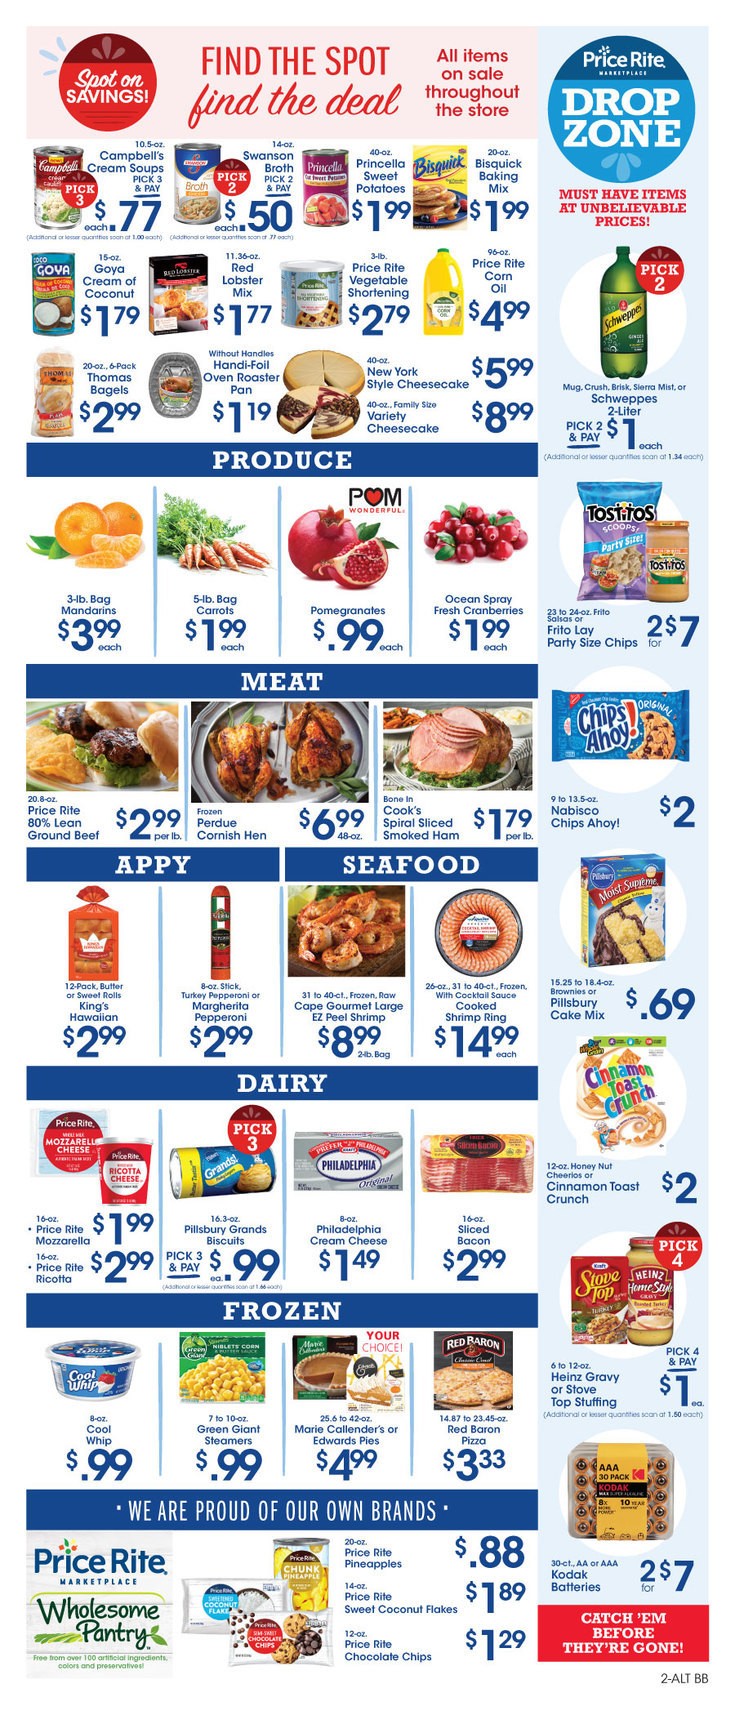 Price Rite Weekly Ad from November 22